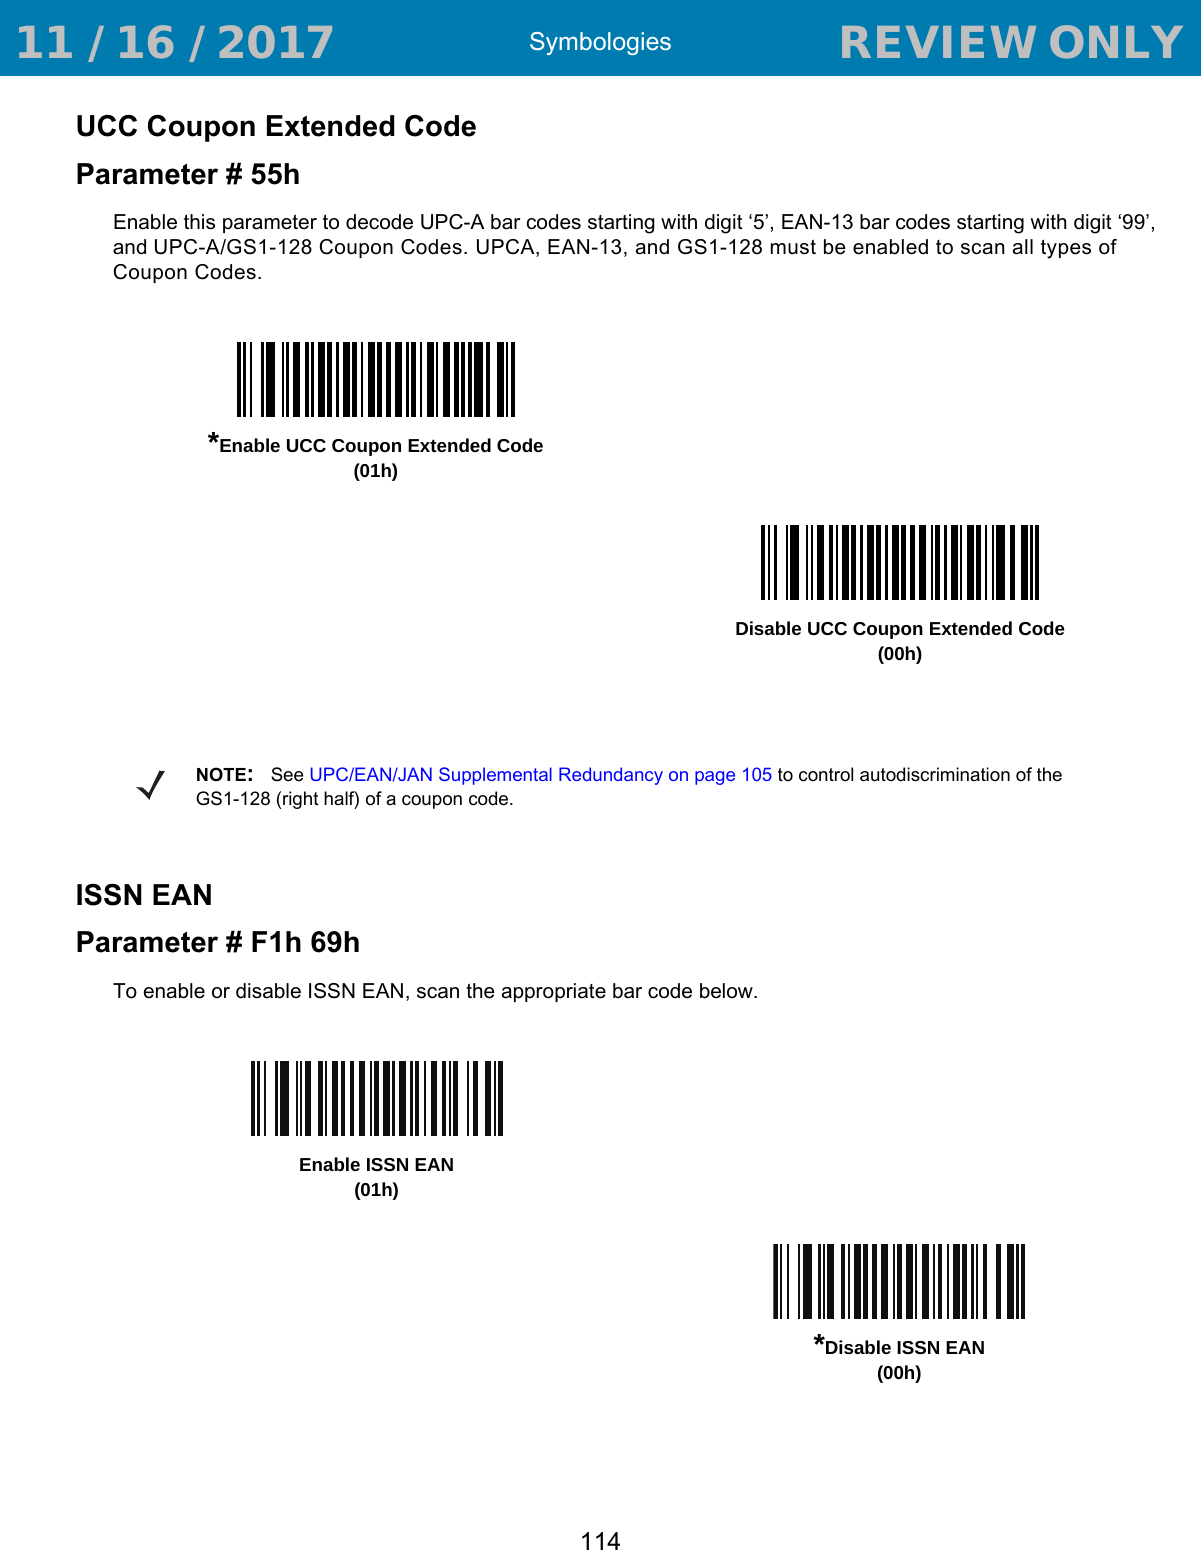 Symbologies114UCC Coupon Extended CodeParameter # 55hEnable this parameter to decode UPC-A bar codes starting with digit ‘5’, EAN-13 bar codes starting with digit ‘99’, and UPC-A/GS1-128 Coupon Codes. UPCA, EAN-13, and GS1-128 must be enabled to scan all types of Coupon Codes. ISSN EANParameter # F1h 69hTo enable or disable ISSN EAN, scan the appropriate bar code below.*Enable UCC Coupon Extended Code(01h)Disable UCC Coupon Extended Code(00h)NOTE:See UPC/EAN/JAN Supplemental Redundancy on page 105 to control autodiscrimination of the GS1-128 (right half) of a coupon code. Enable ISSN EAN (01h)*Disable ISSN EAN (00h) 11 / 16 / 2017                                  REVIEW ONLY                             REVIEW ONLY - REVIEW ONLY - REVIEW ONLY